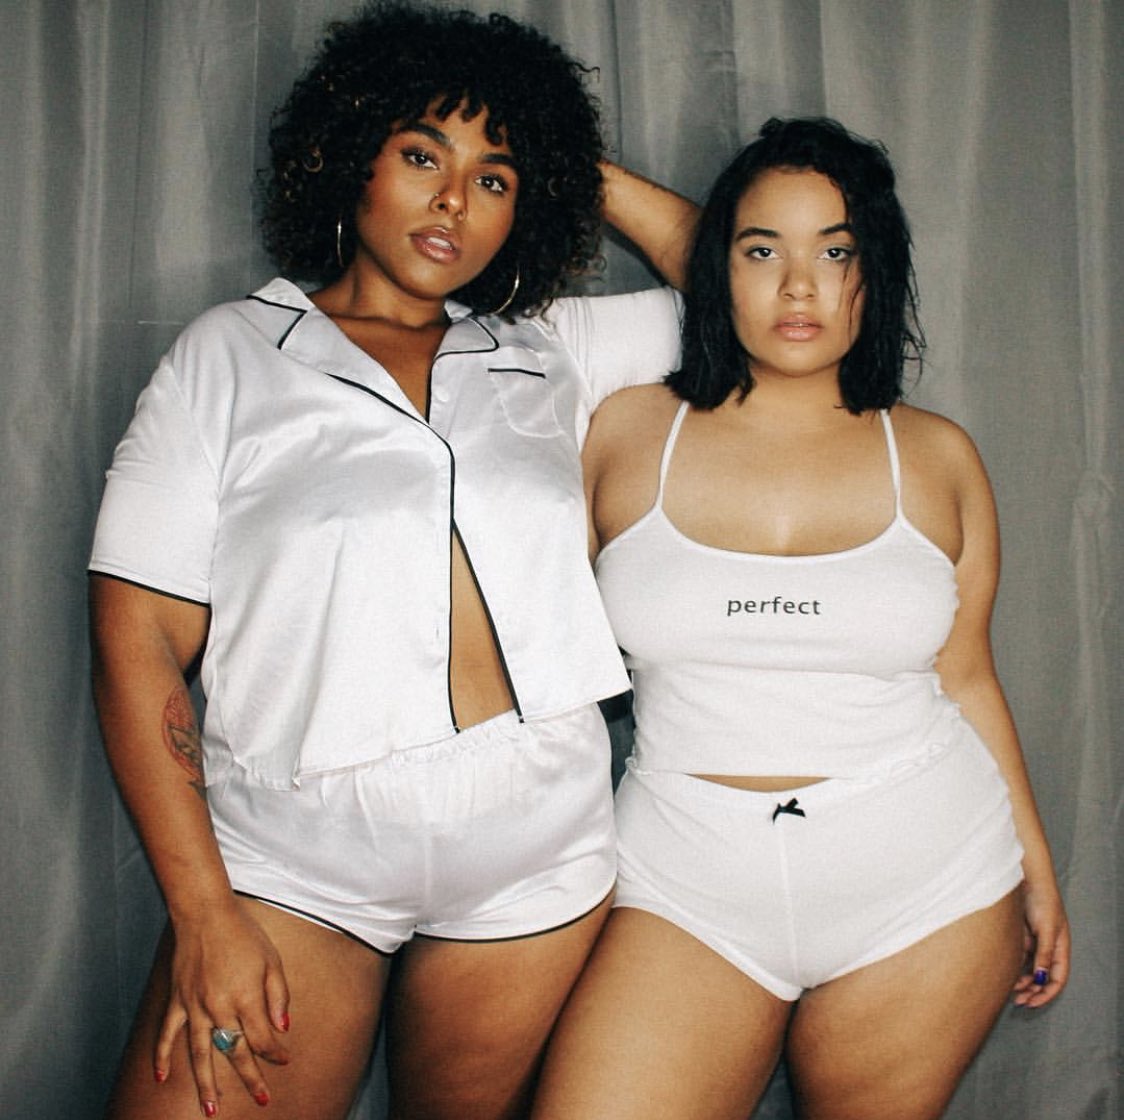 RT @the_thicc: ☁️ literal girls of our dreams ☁️ @badgalkekeee @DeniseMercedes https://t.co/YV1DRr7yB8